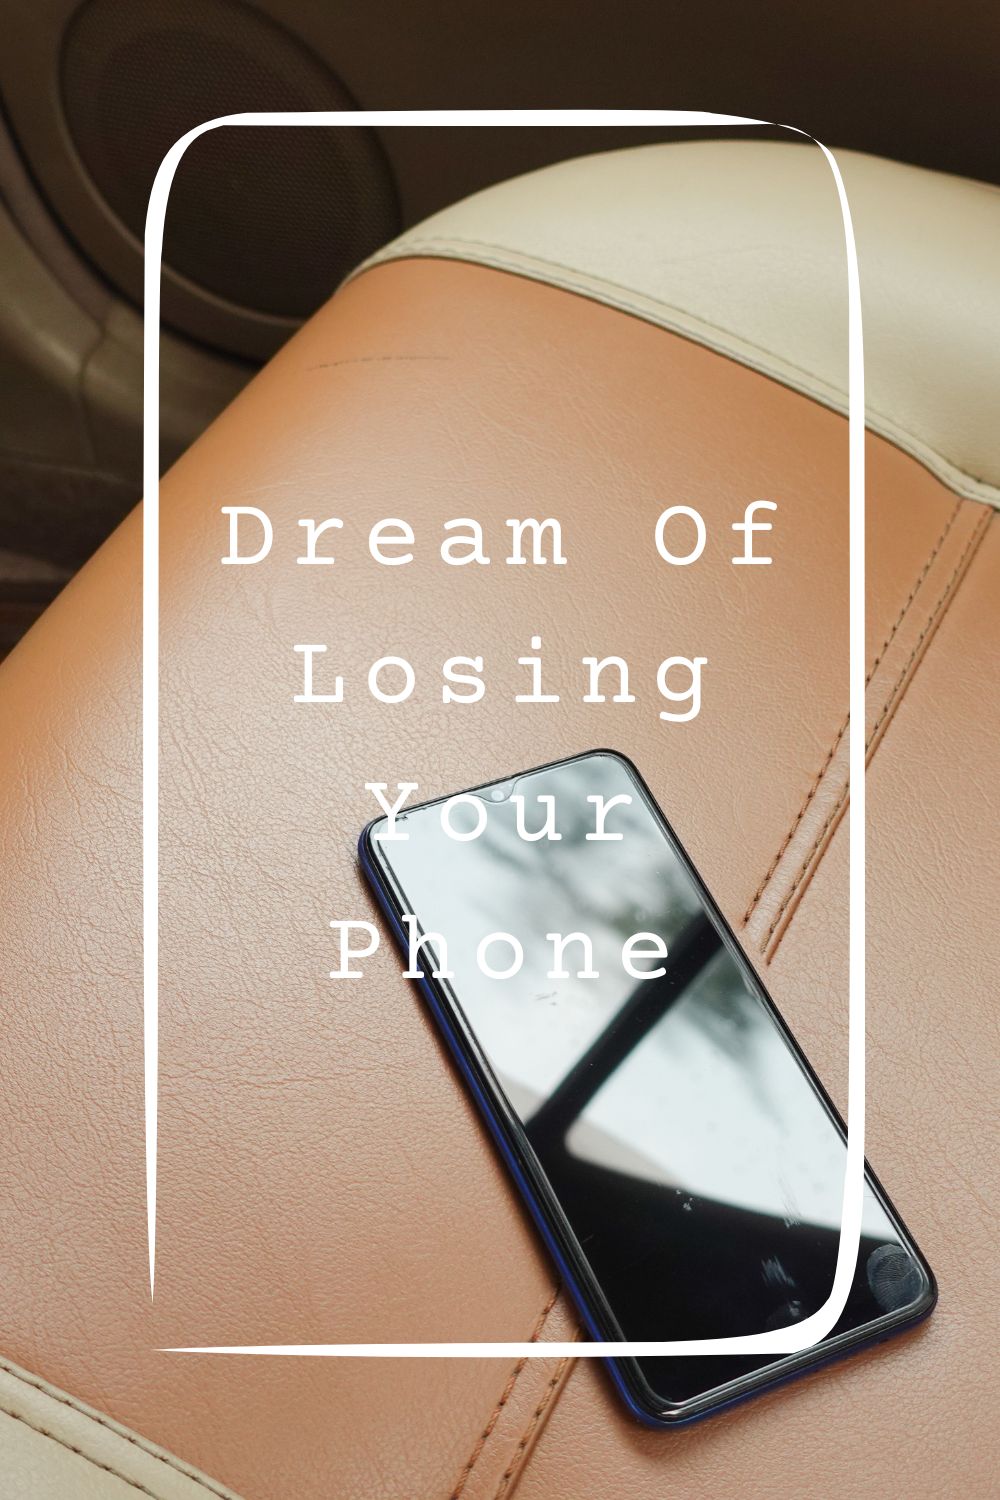 Dream Of Losing Your Phone Meanings 2